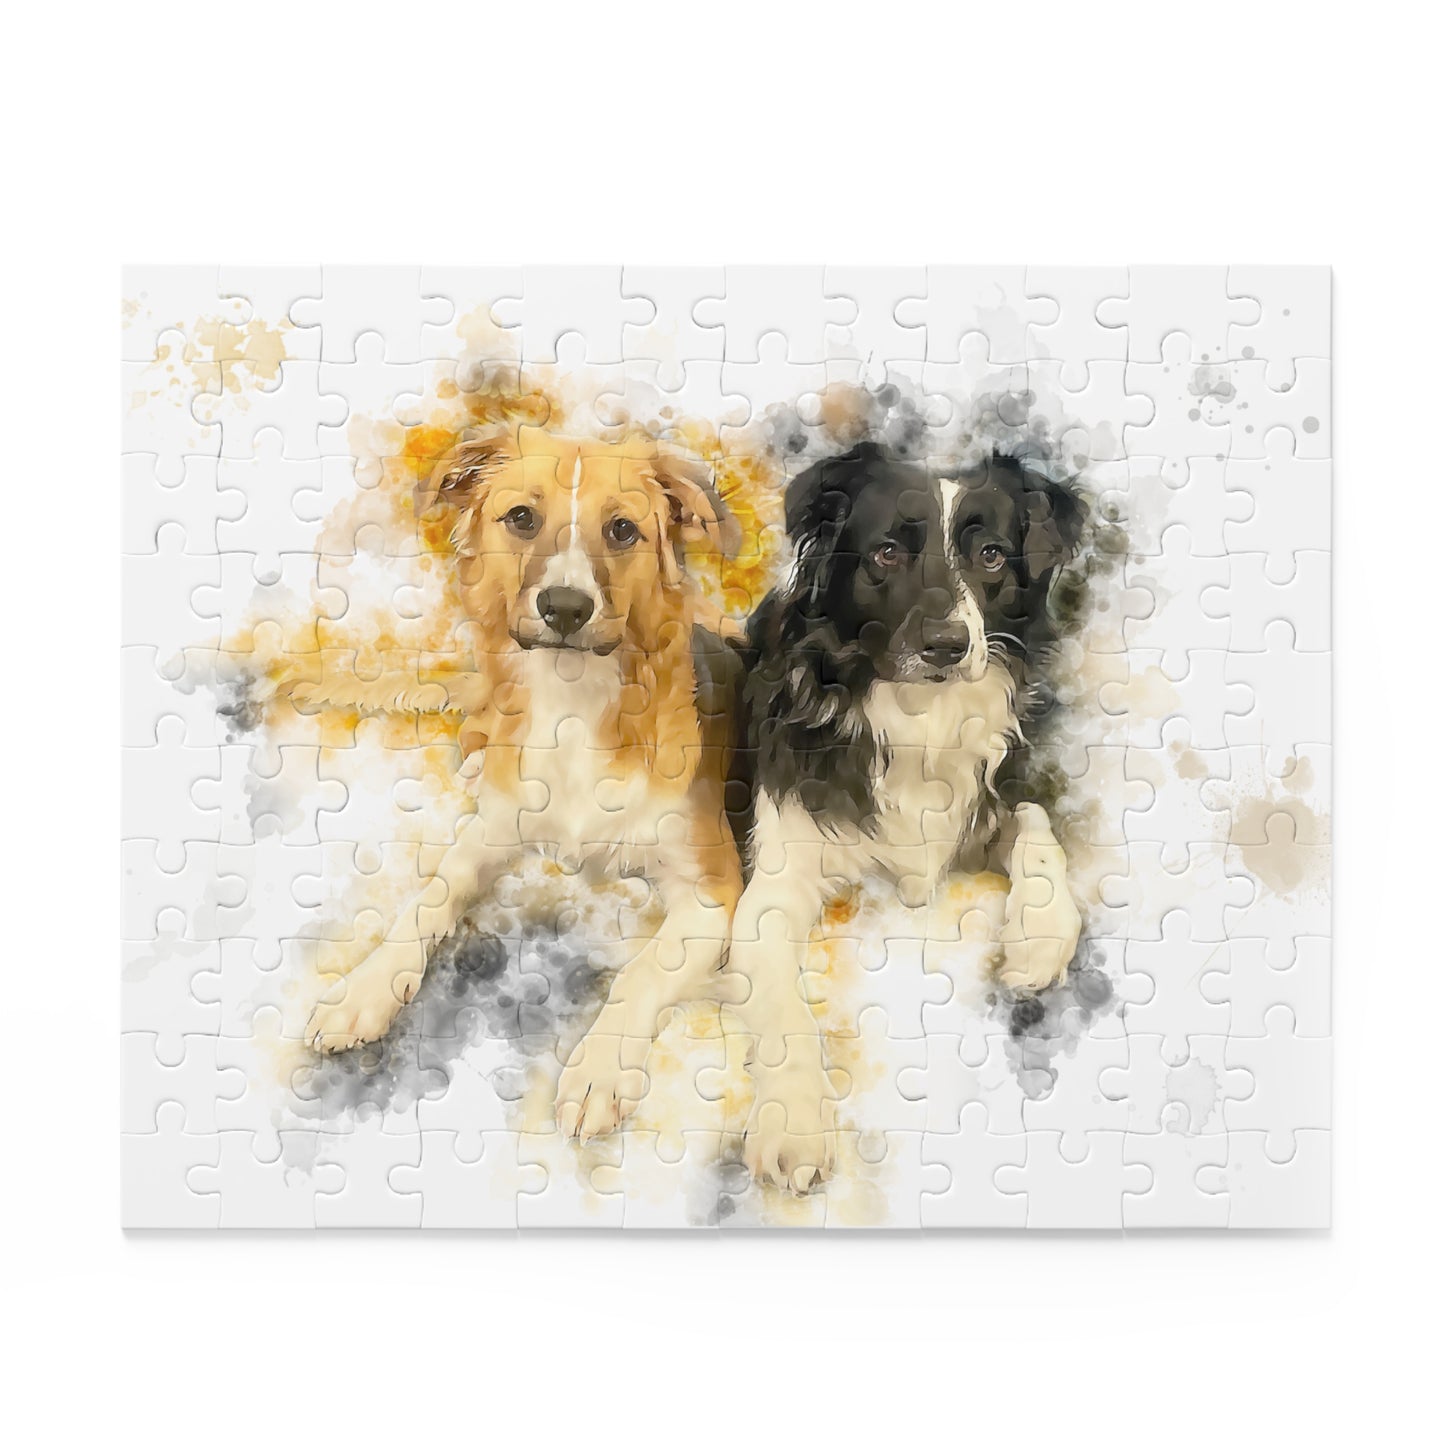 126-Piece Personalized Magnetic Jigsaw Puzzle With Digitally Hand-Painted Pet Portrait